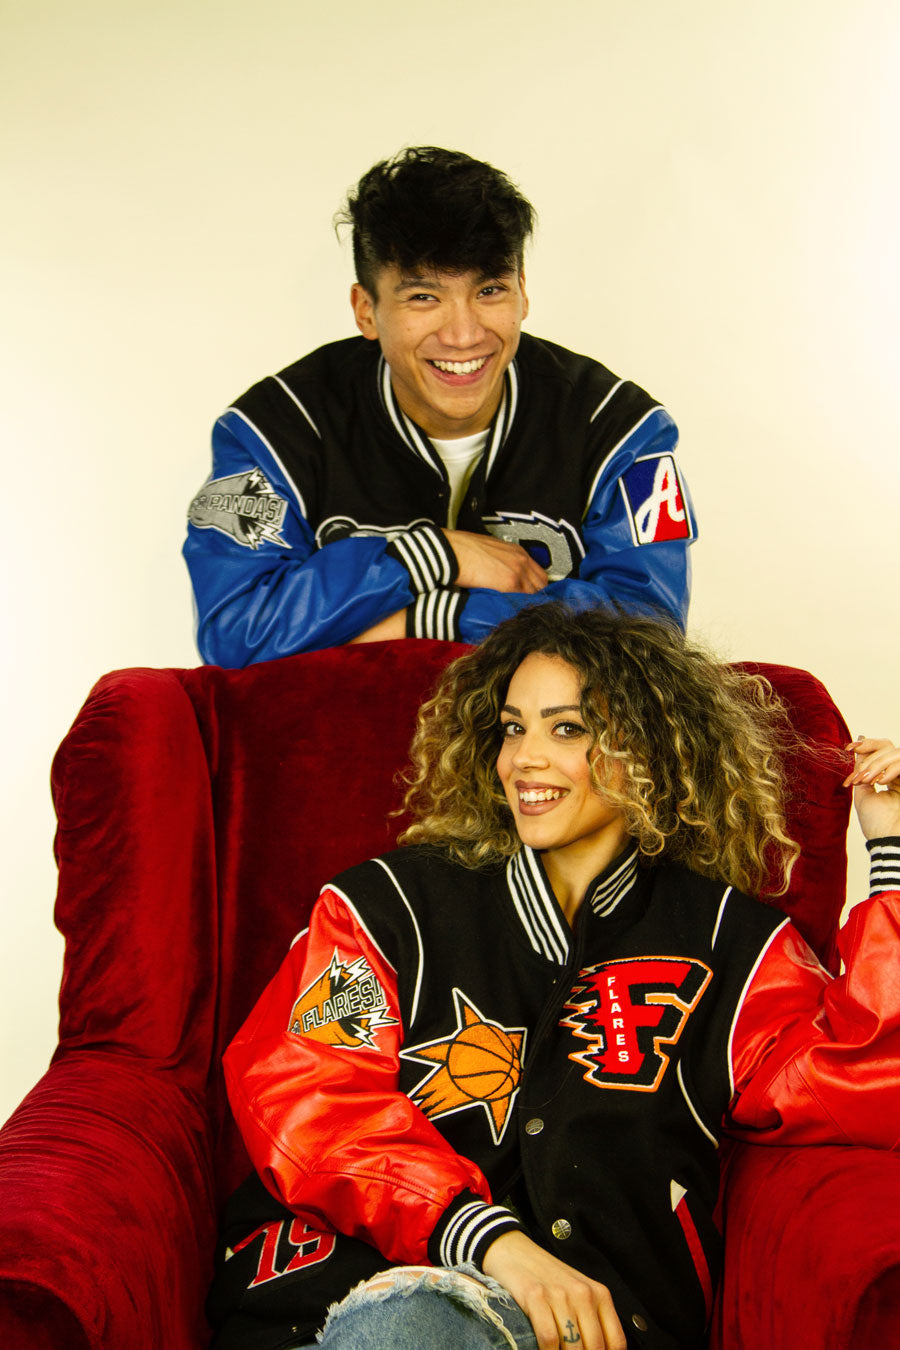 mvp varsity jackets, college style streetwear clothing for men and women with colors, details and patches of the two teams of atypical pandas and the playoffs flares